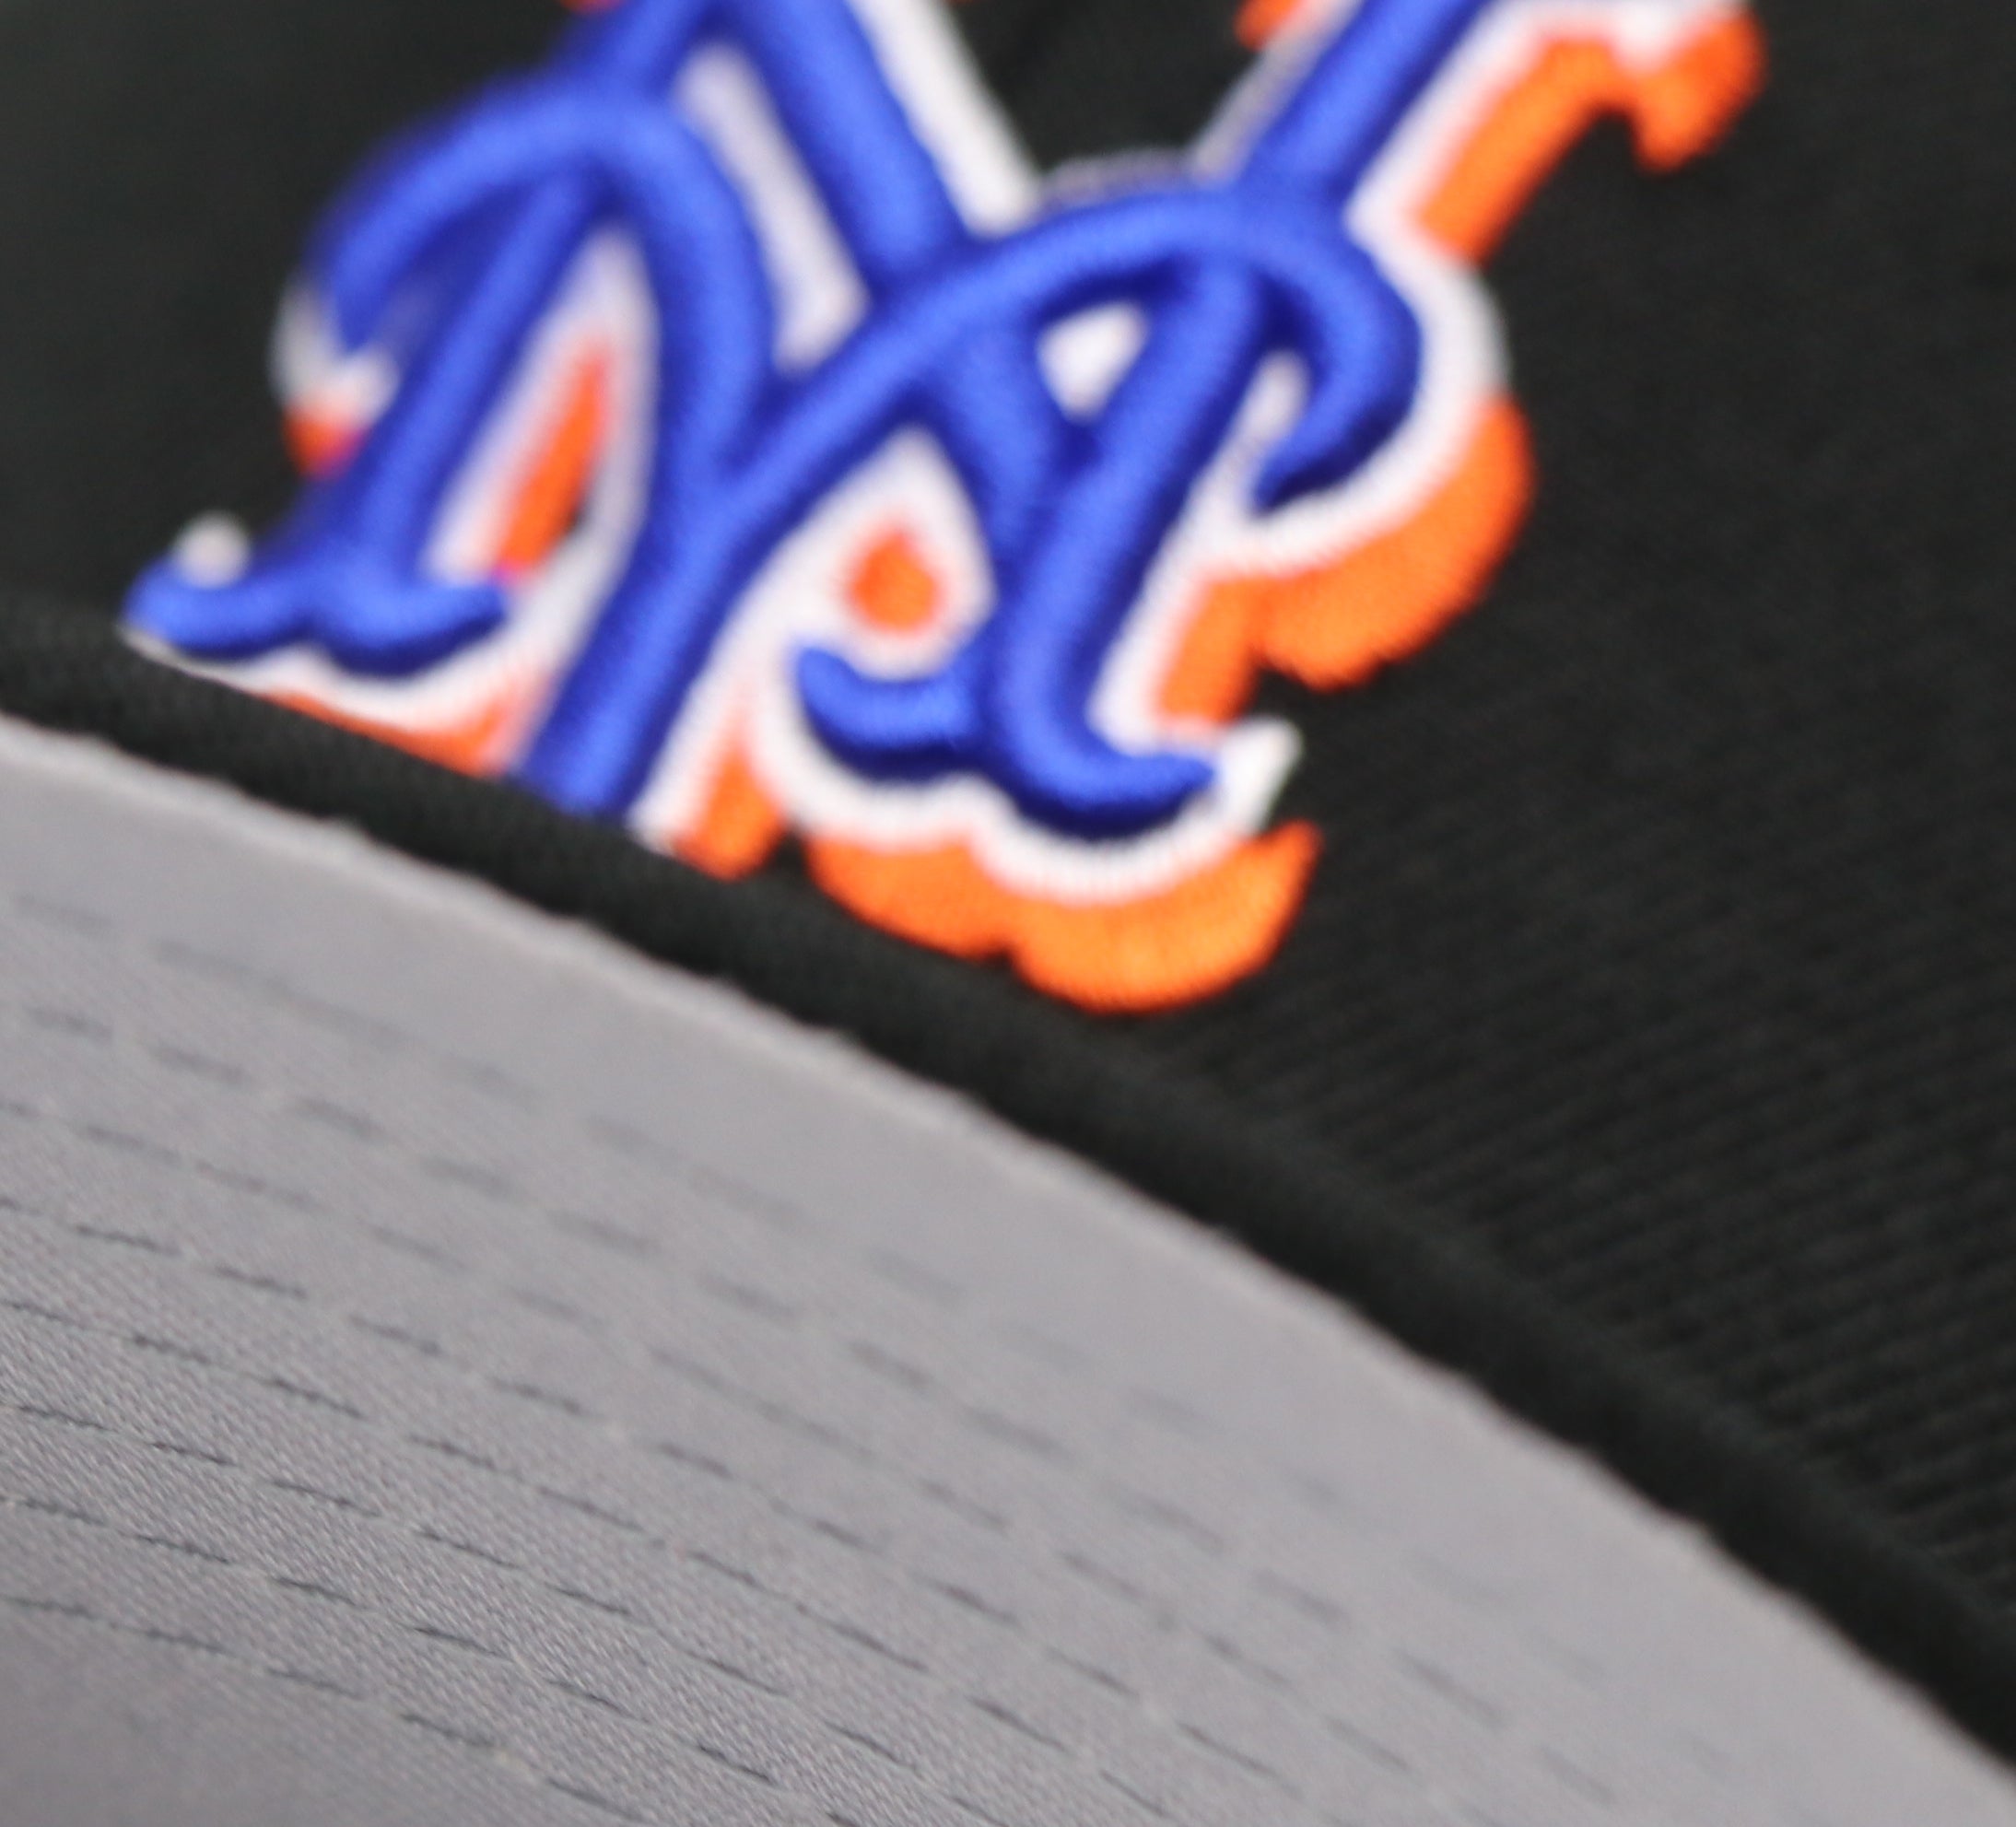 NEW YORK METS (BLACK) "2015 WORLDSERIES" NEW ERA 59FIFTY FITTED